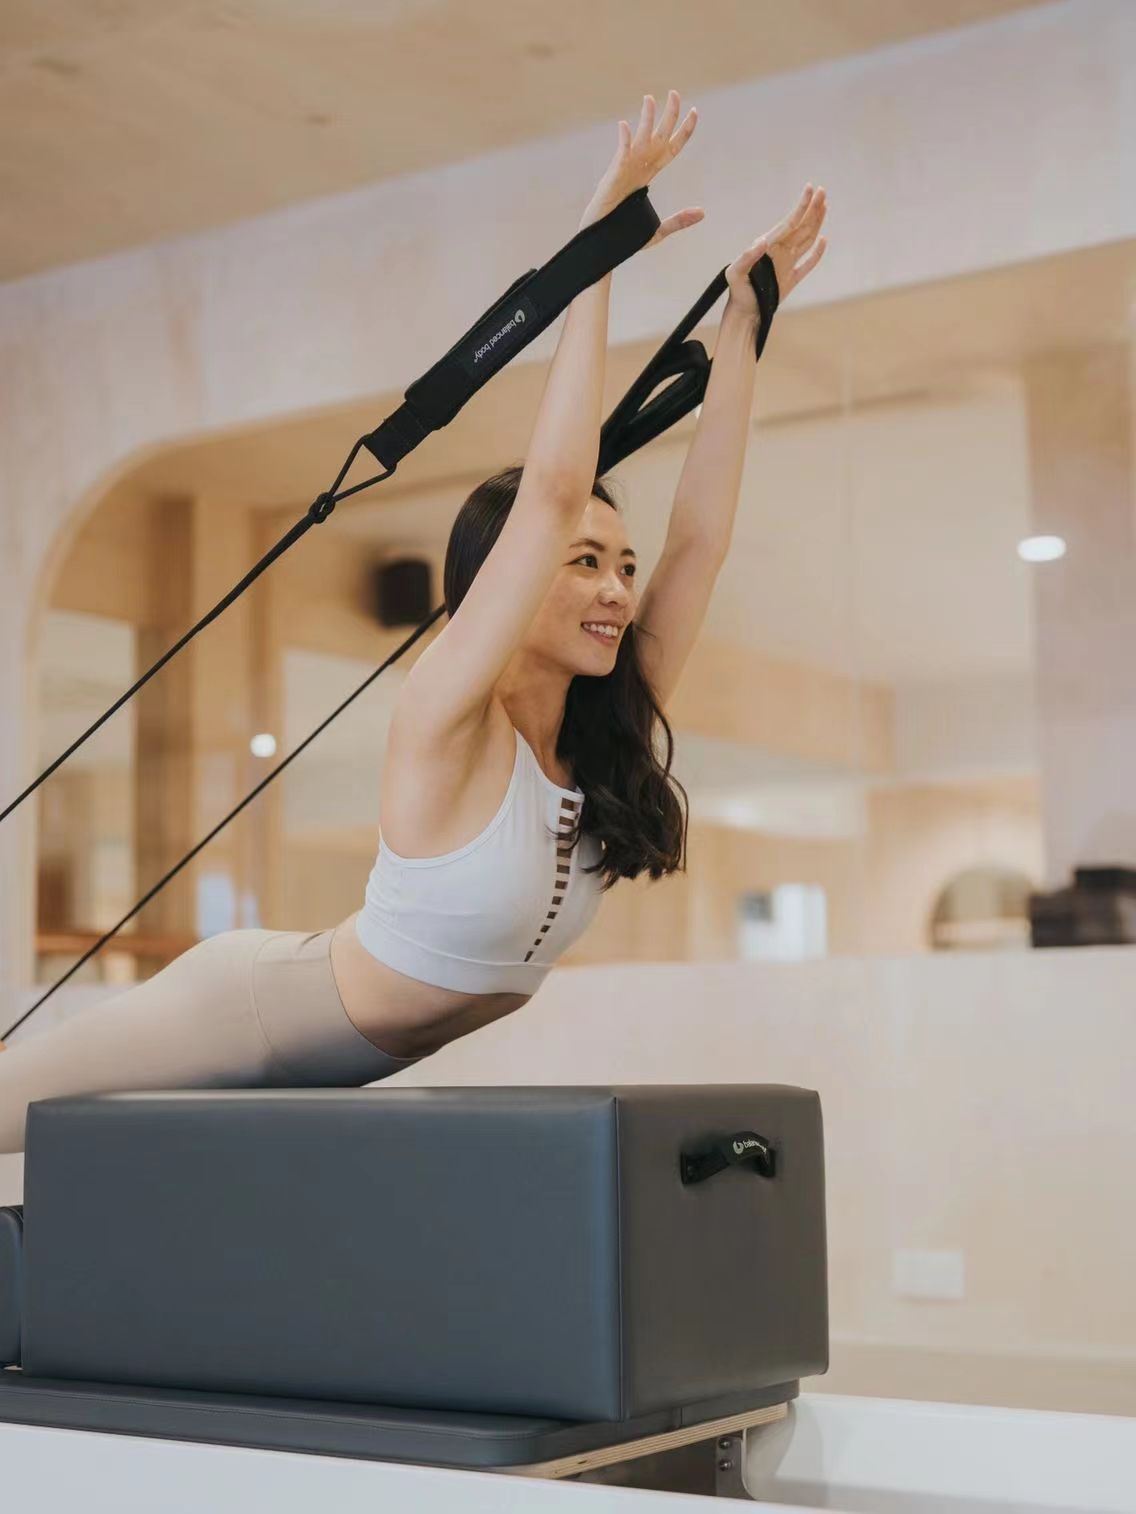 Can Pilates Reformer help with promoting healthy kidney function, whic